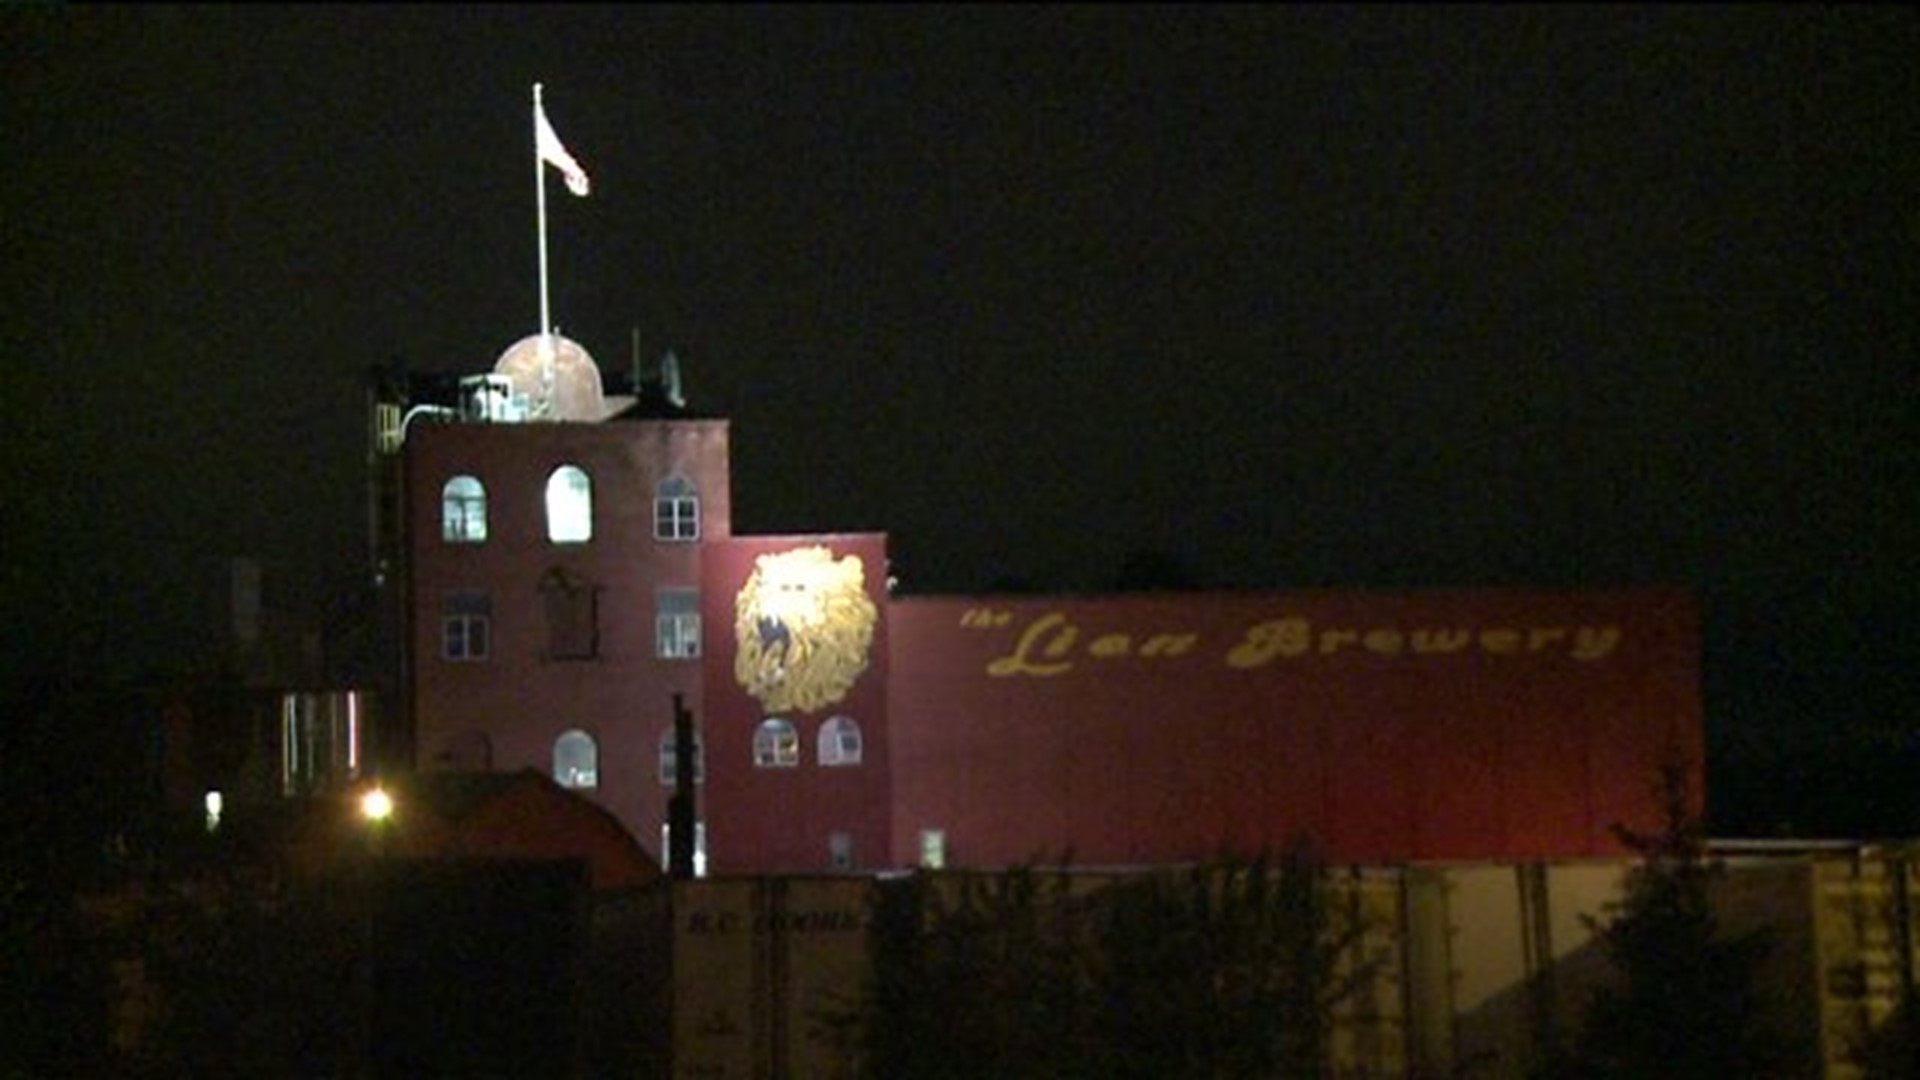 Evacuation at Local Brewery Caused by Ammonia Leak